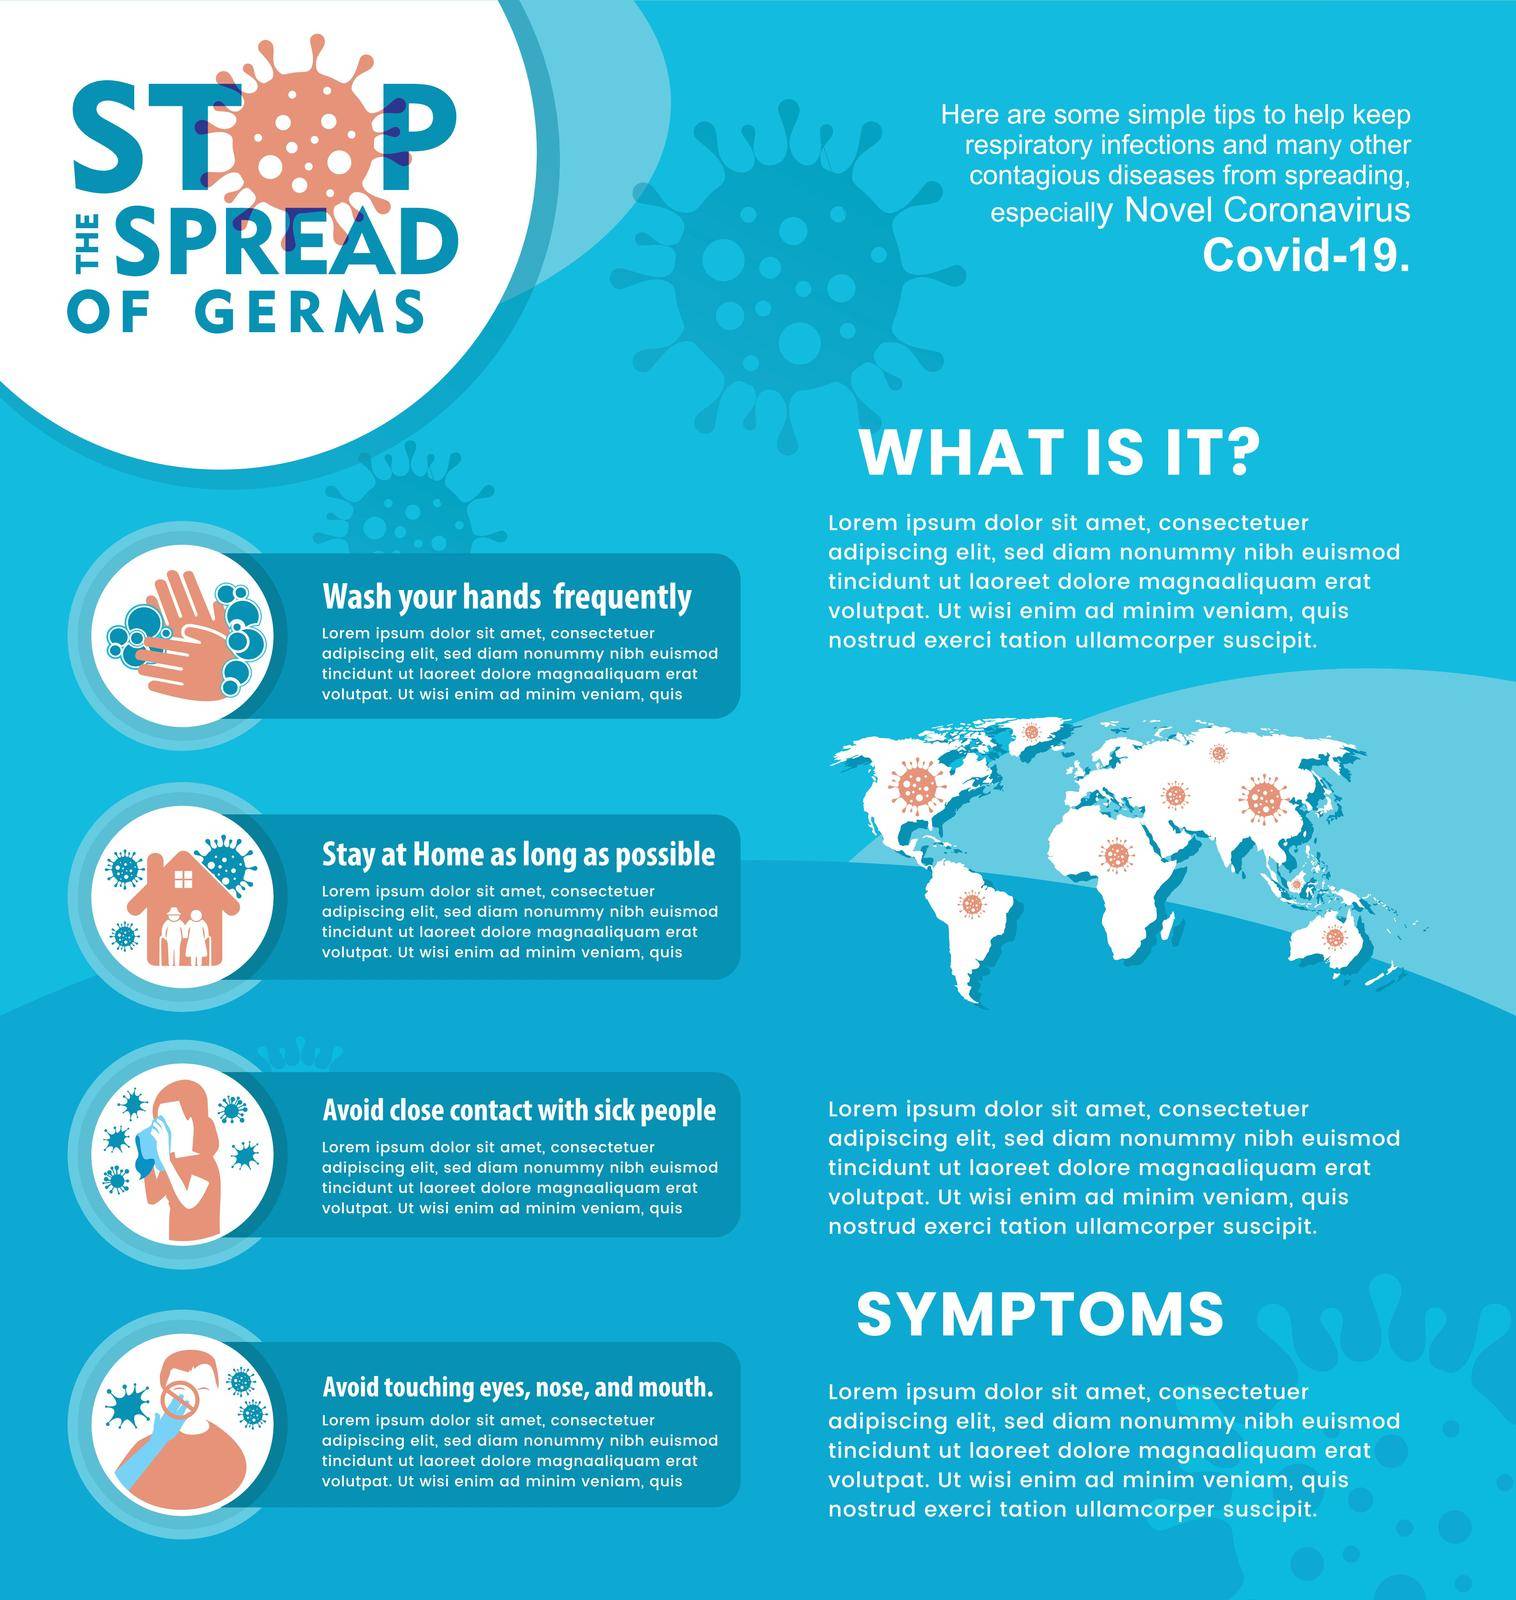 Corona virus awareness poster template to aware and stop the spread of germs corona virus pandemic  by Up2date